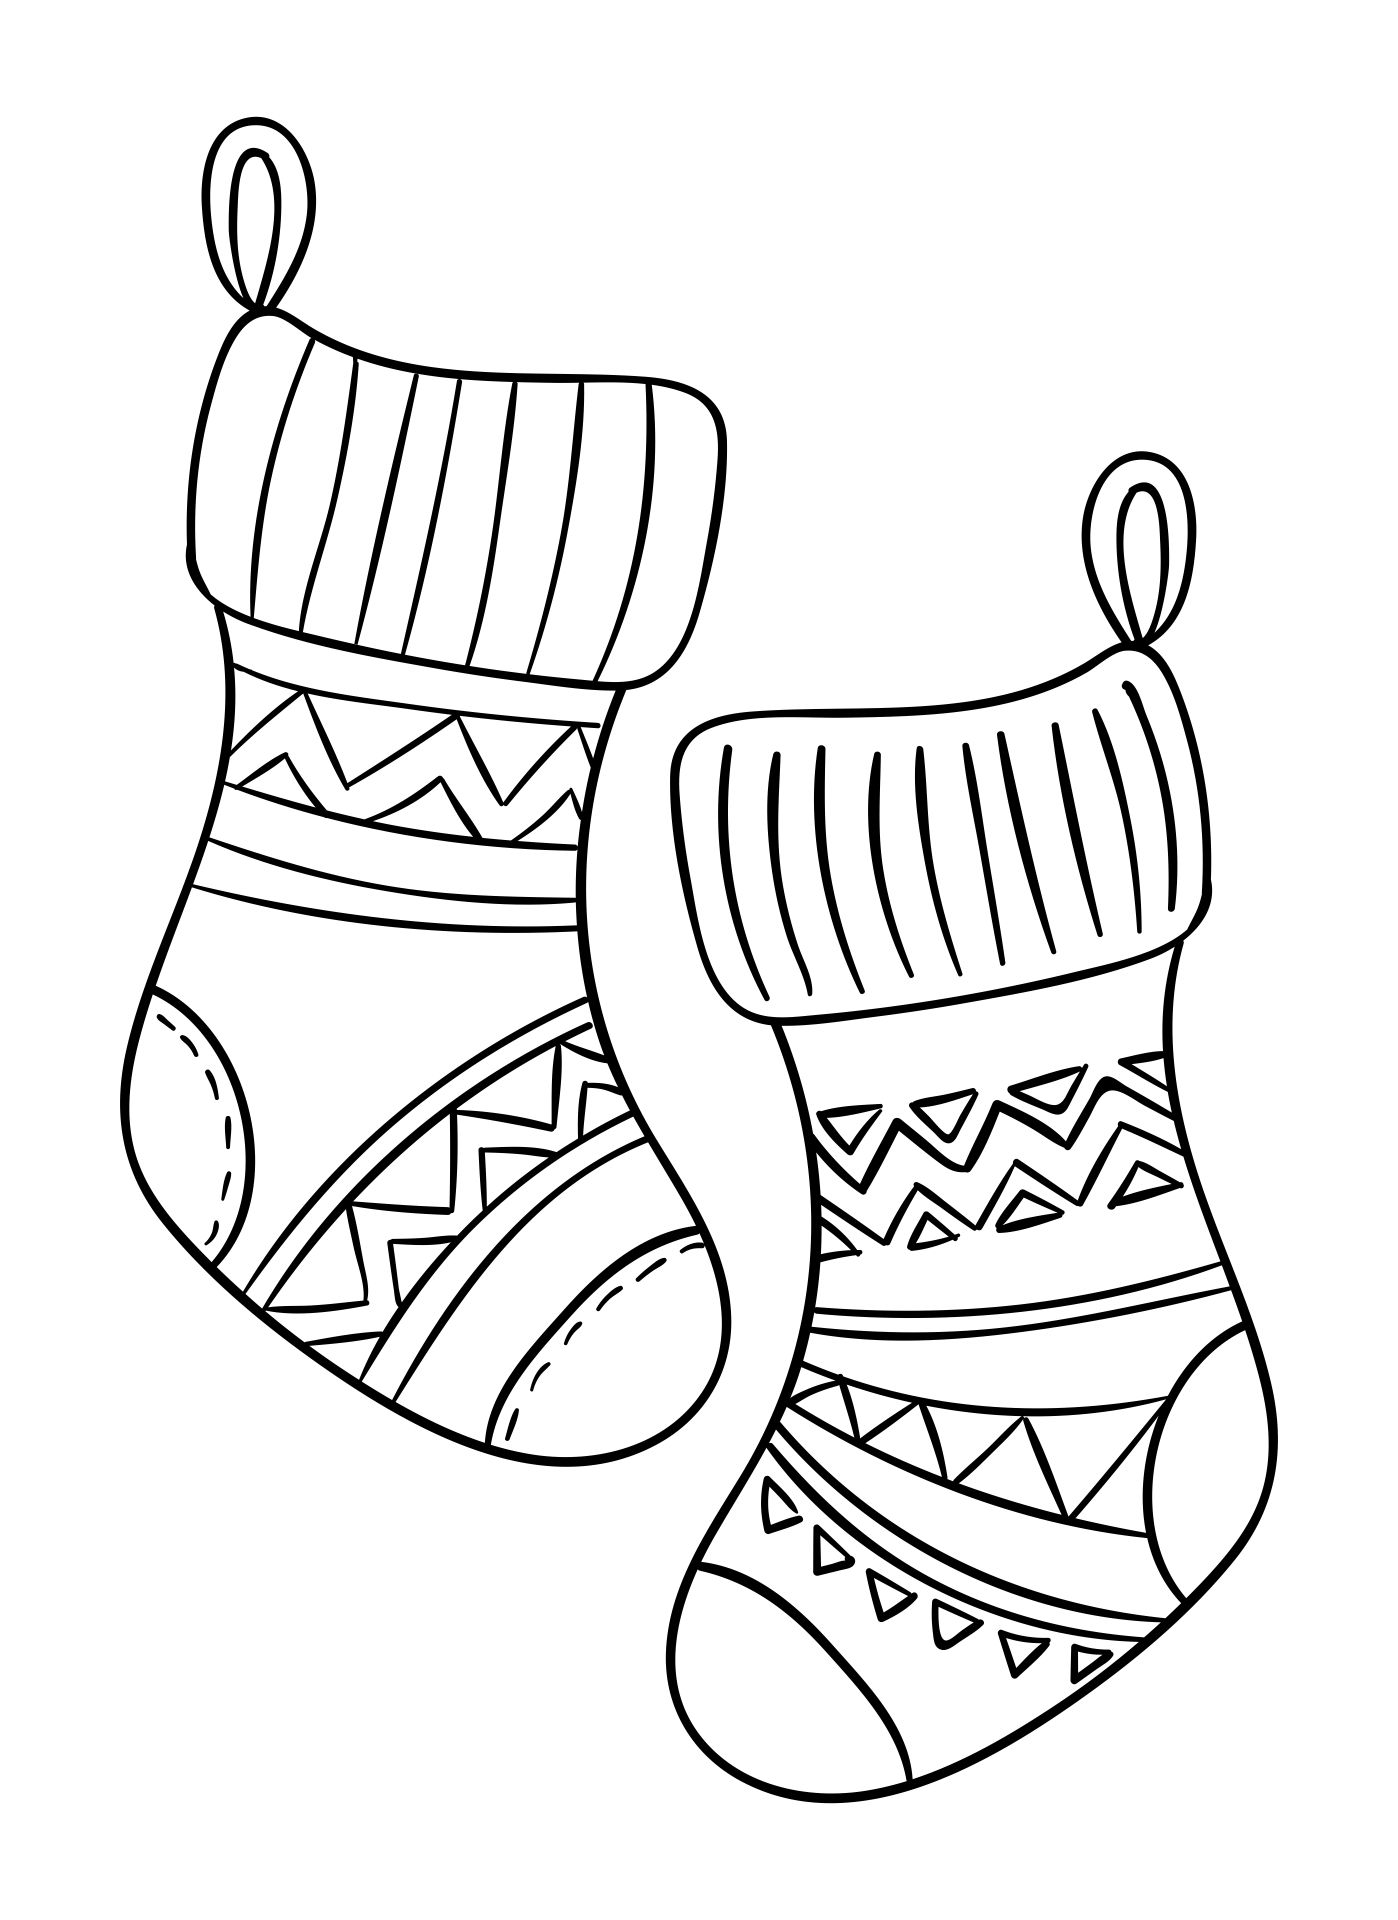 Christmas Stocking Coloring Pages Printable